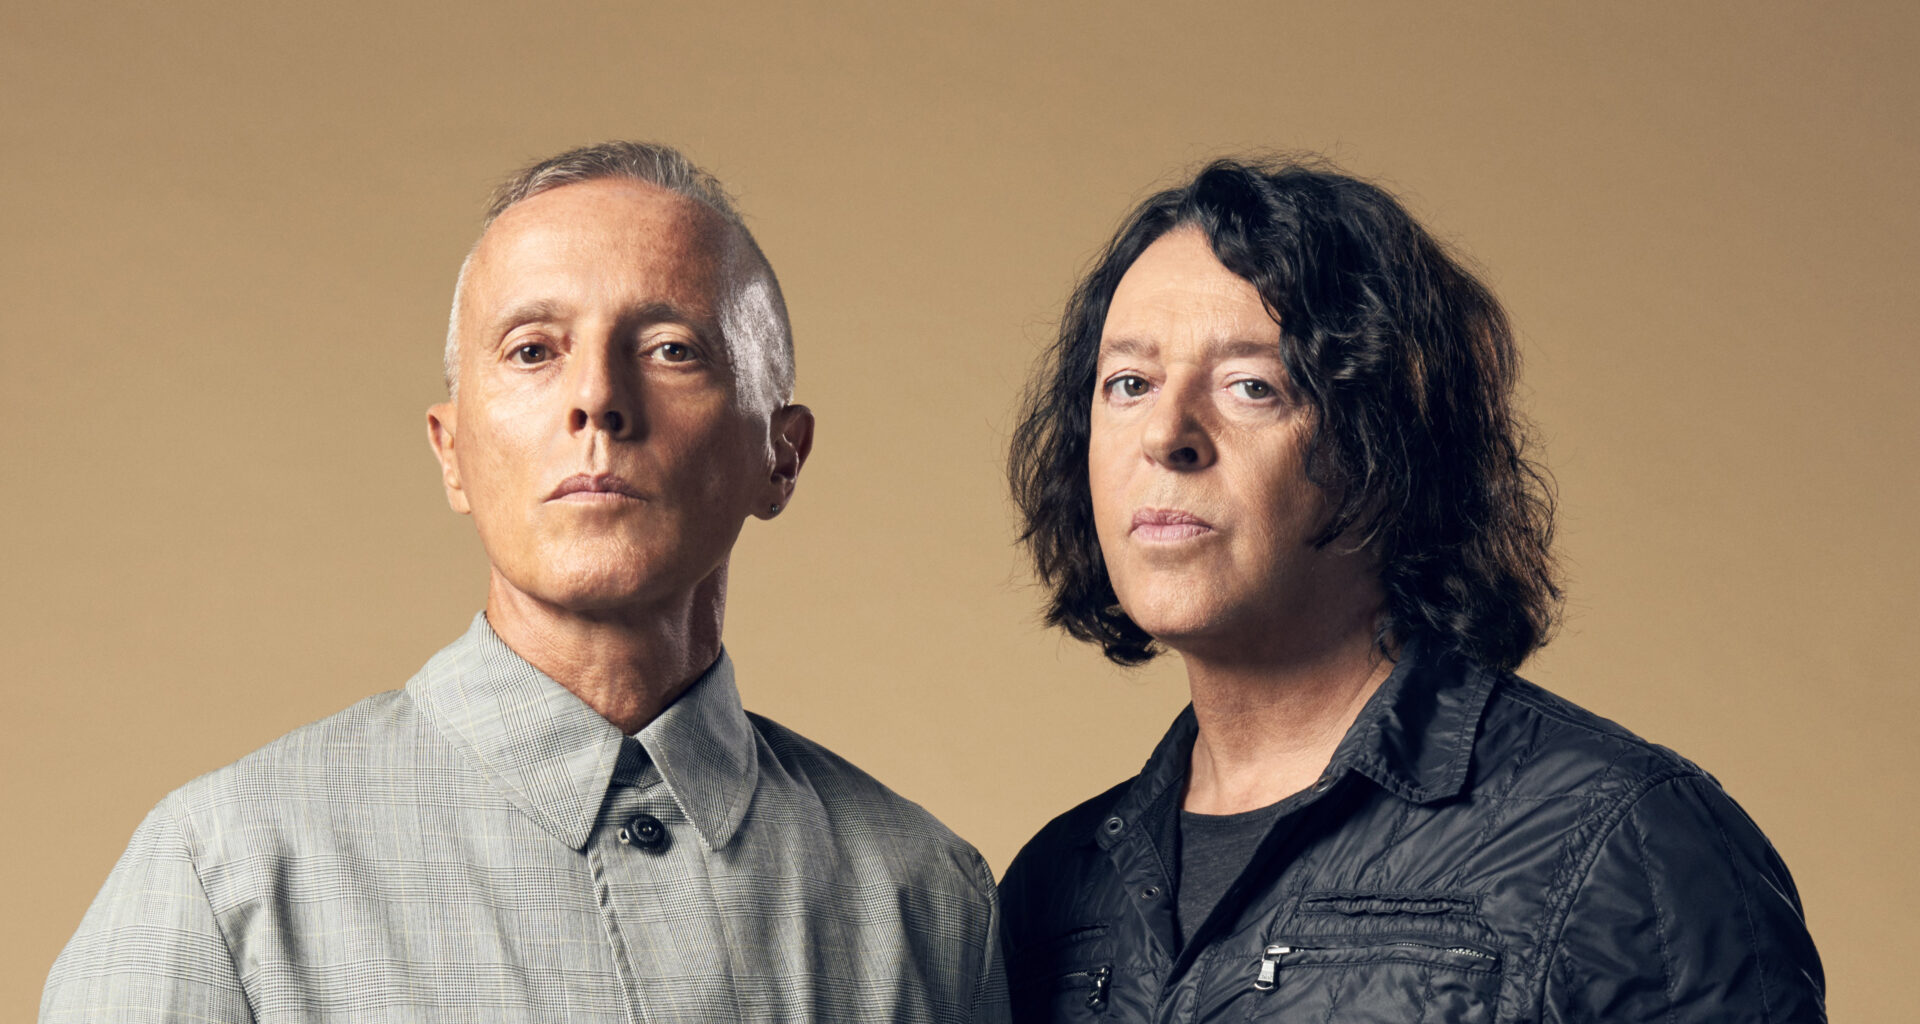 How Tears For Fears Let It All Out: The Story Behind “Shout